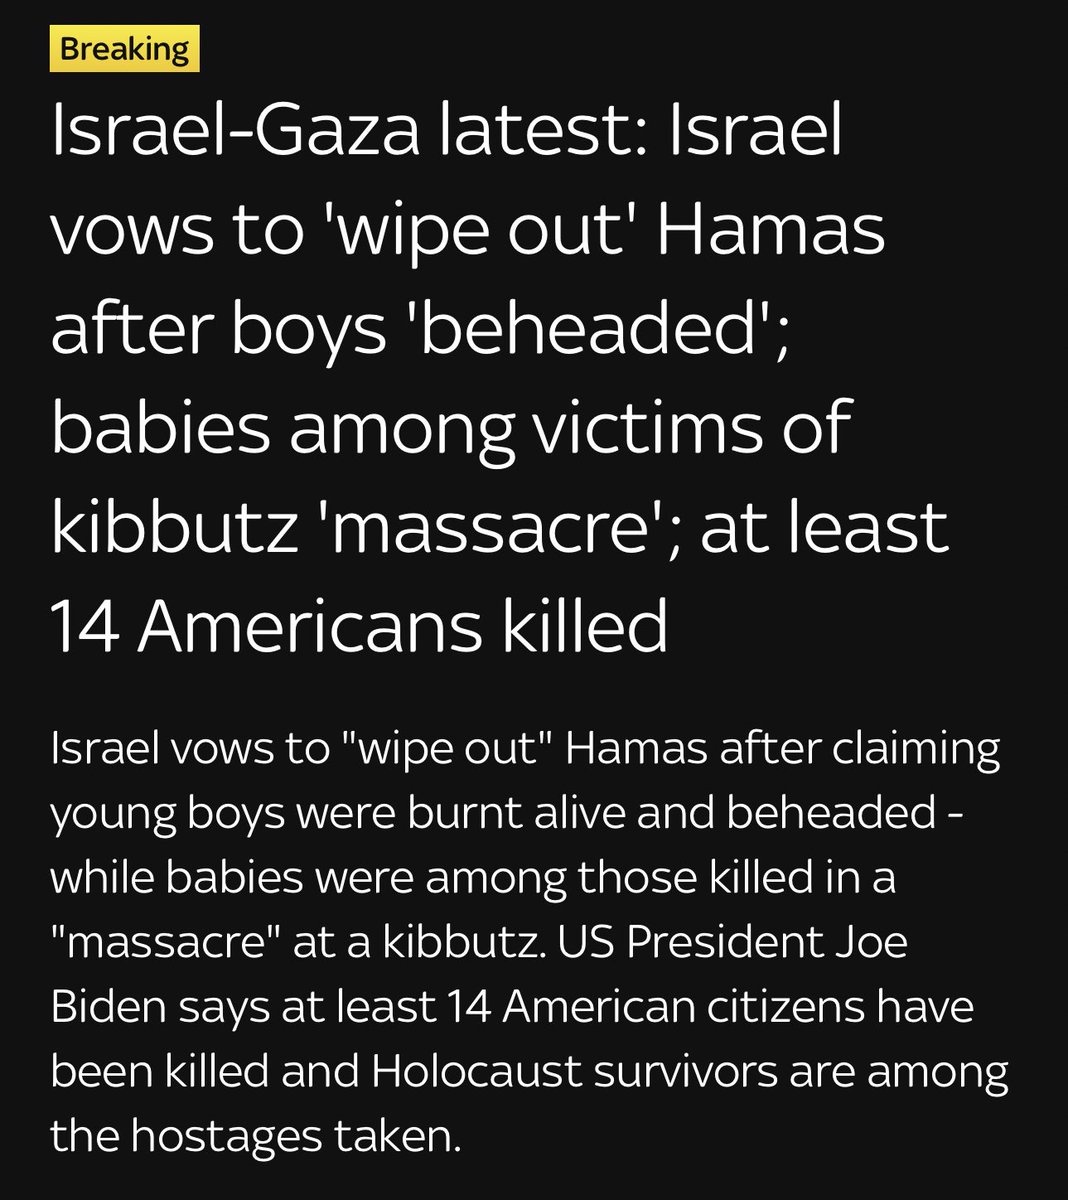 Anyone who is supporting Palestine is condoning this.The beheading of BABIES. DONT come and tell me “its only the terrorists”, bullshit. They, as a people, allowed Hammas to exist. Sick, twisted evil men who subjagate women and now babies #HamasMassacre #IStandWithIsrael #Israel